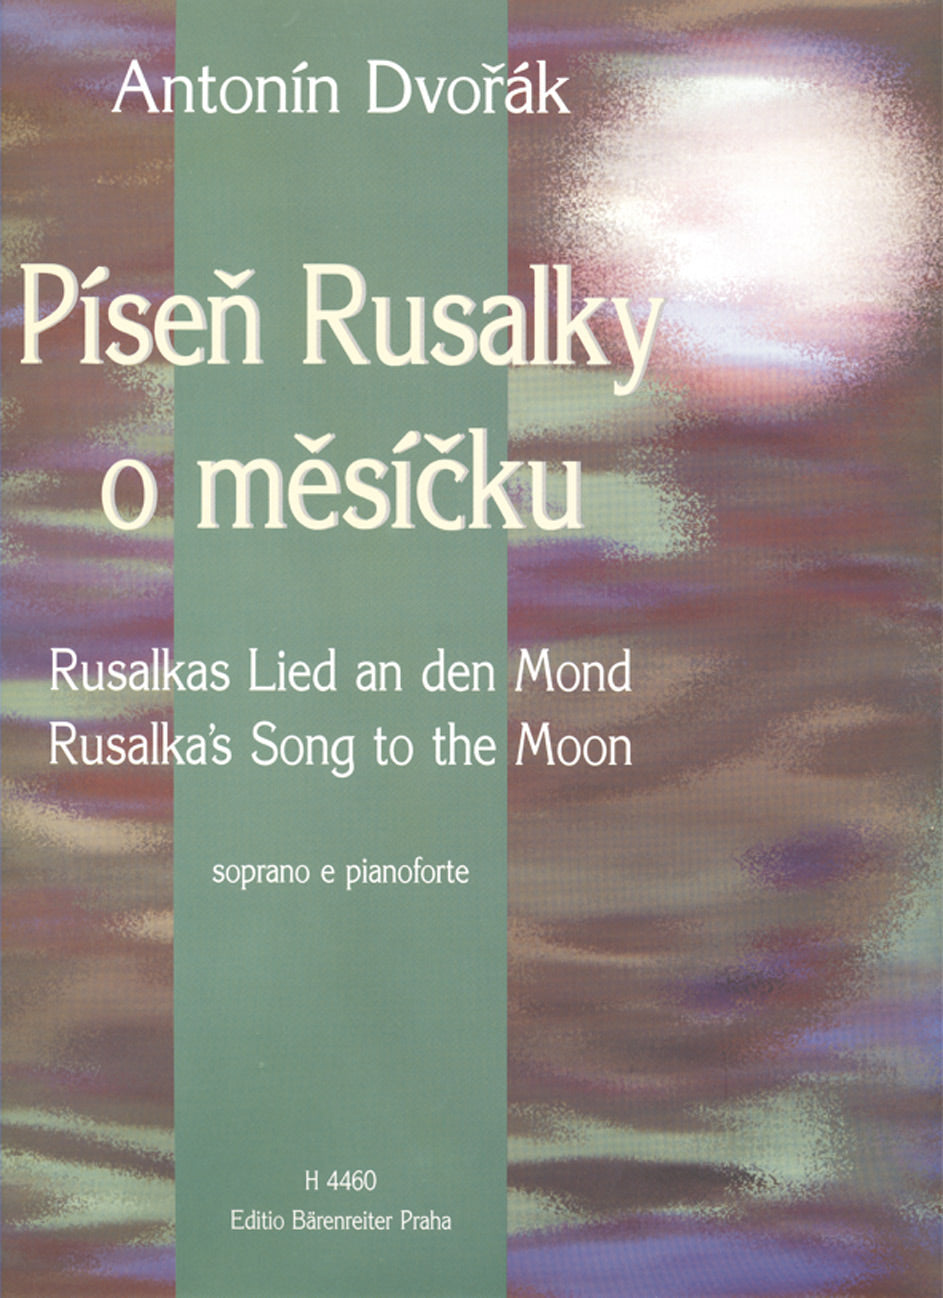 Dvořák: Rusalka's Song to the Moon